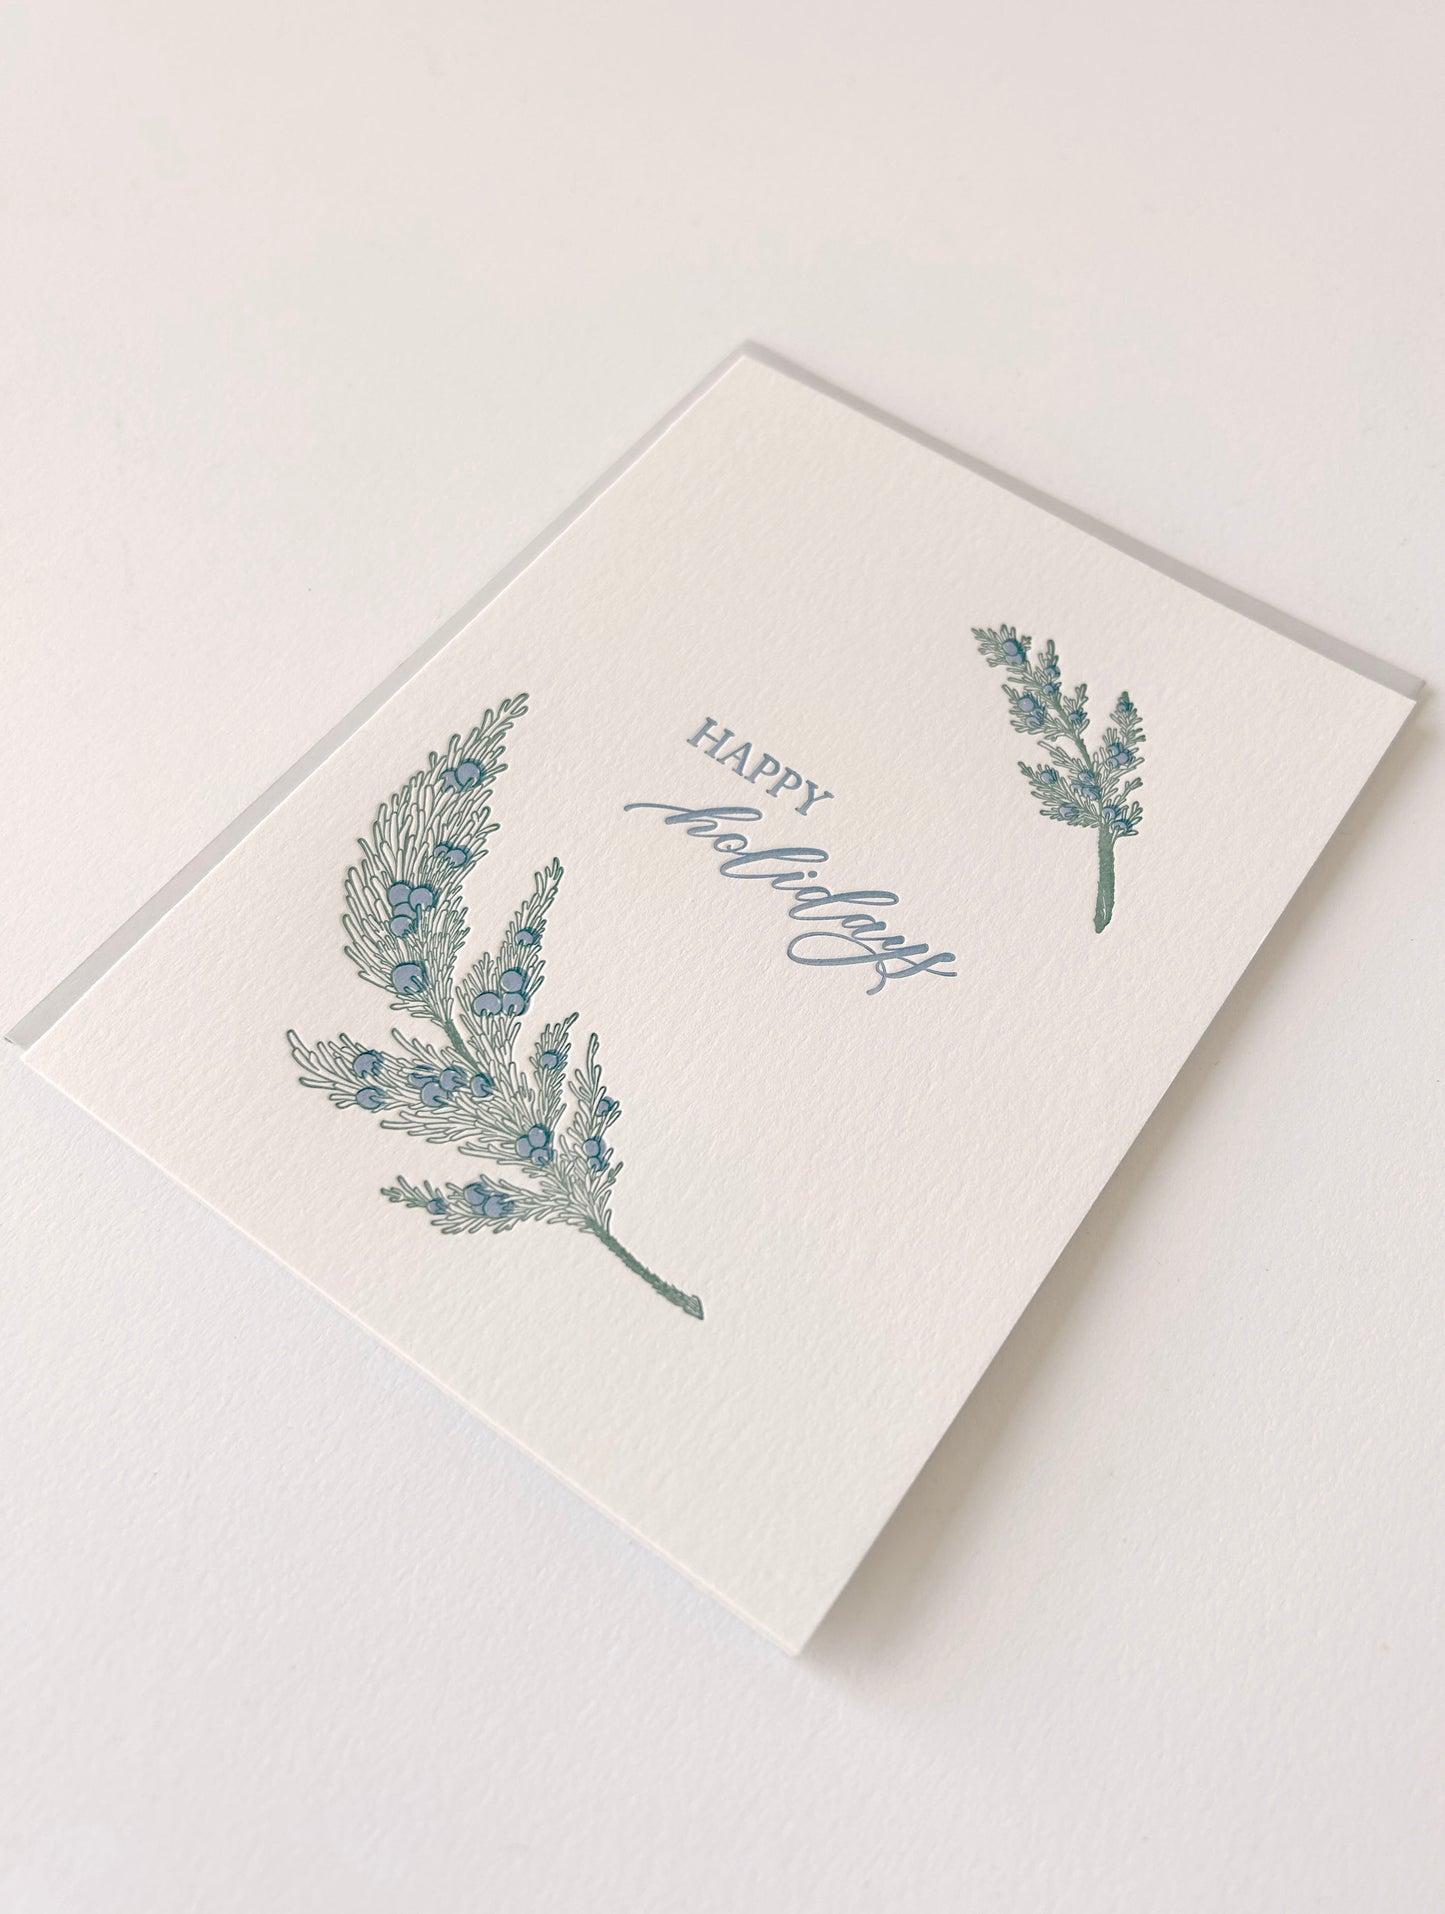 Letterpress holiday card with greenery that says "Happy Holidays" by Rust Belt Love